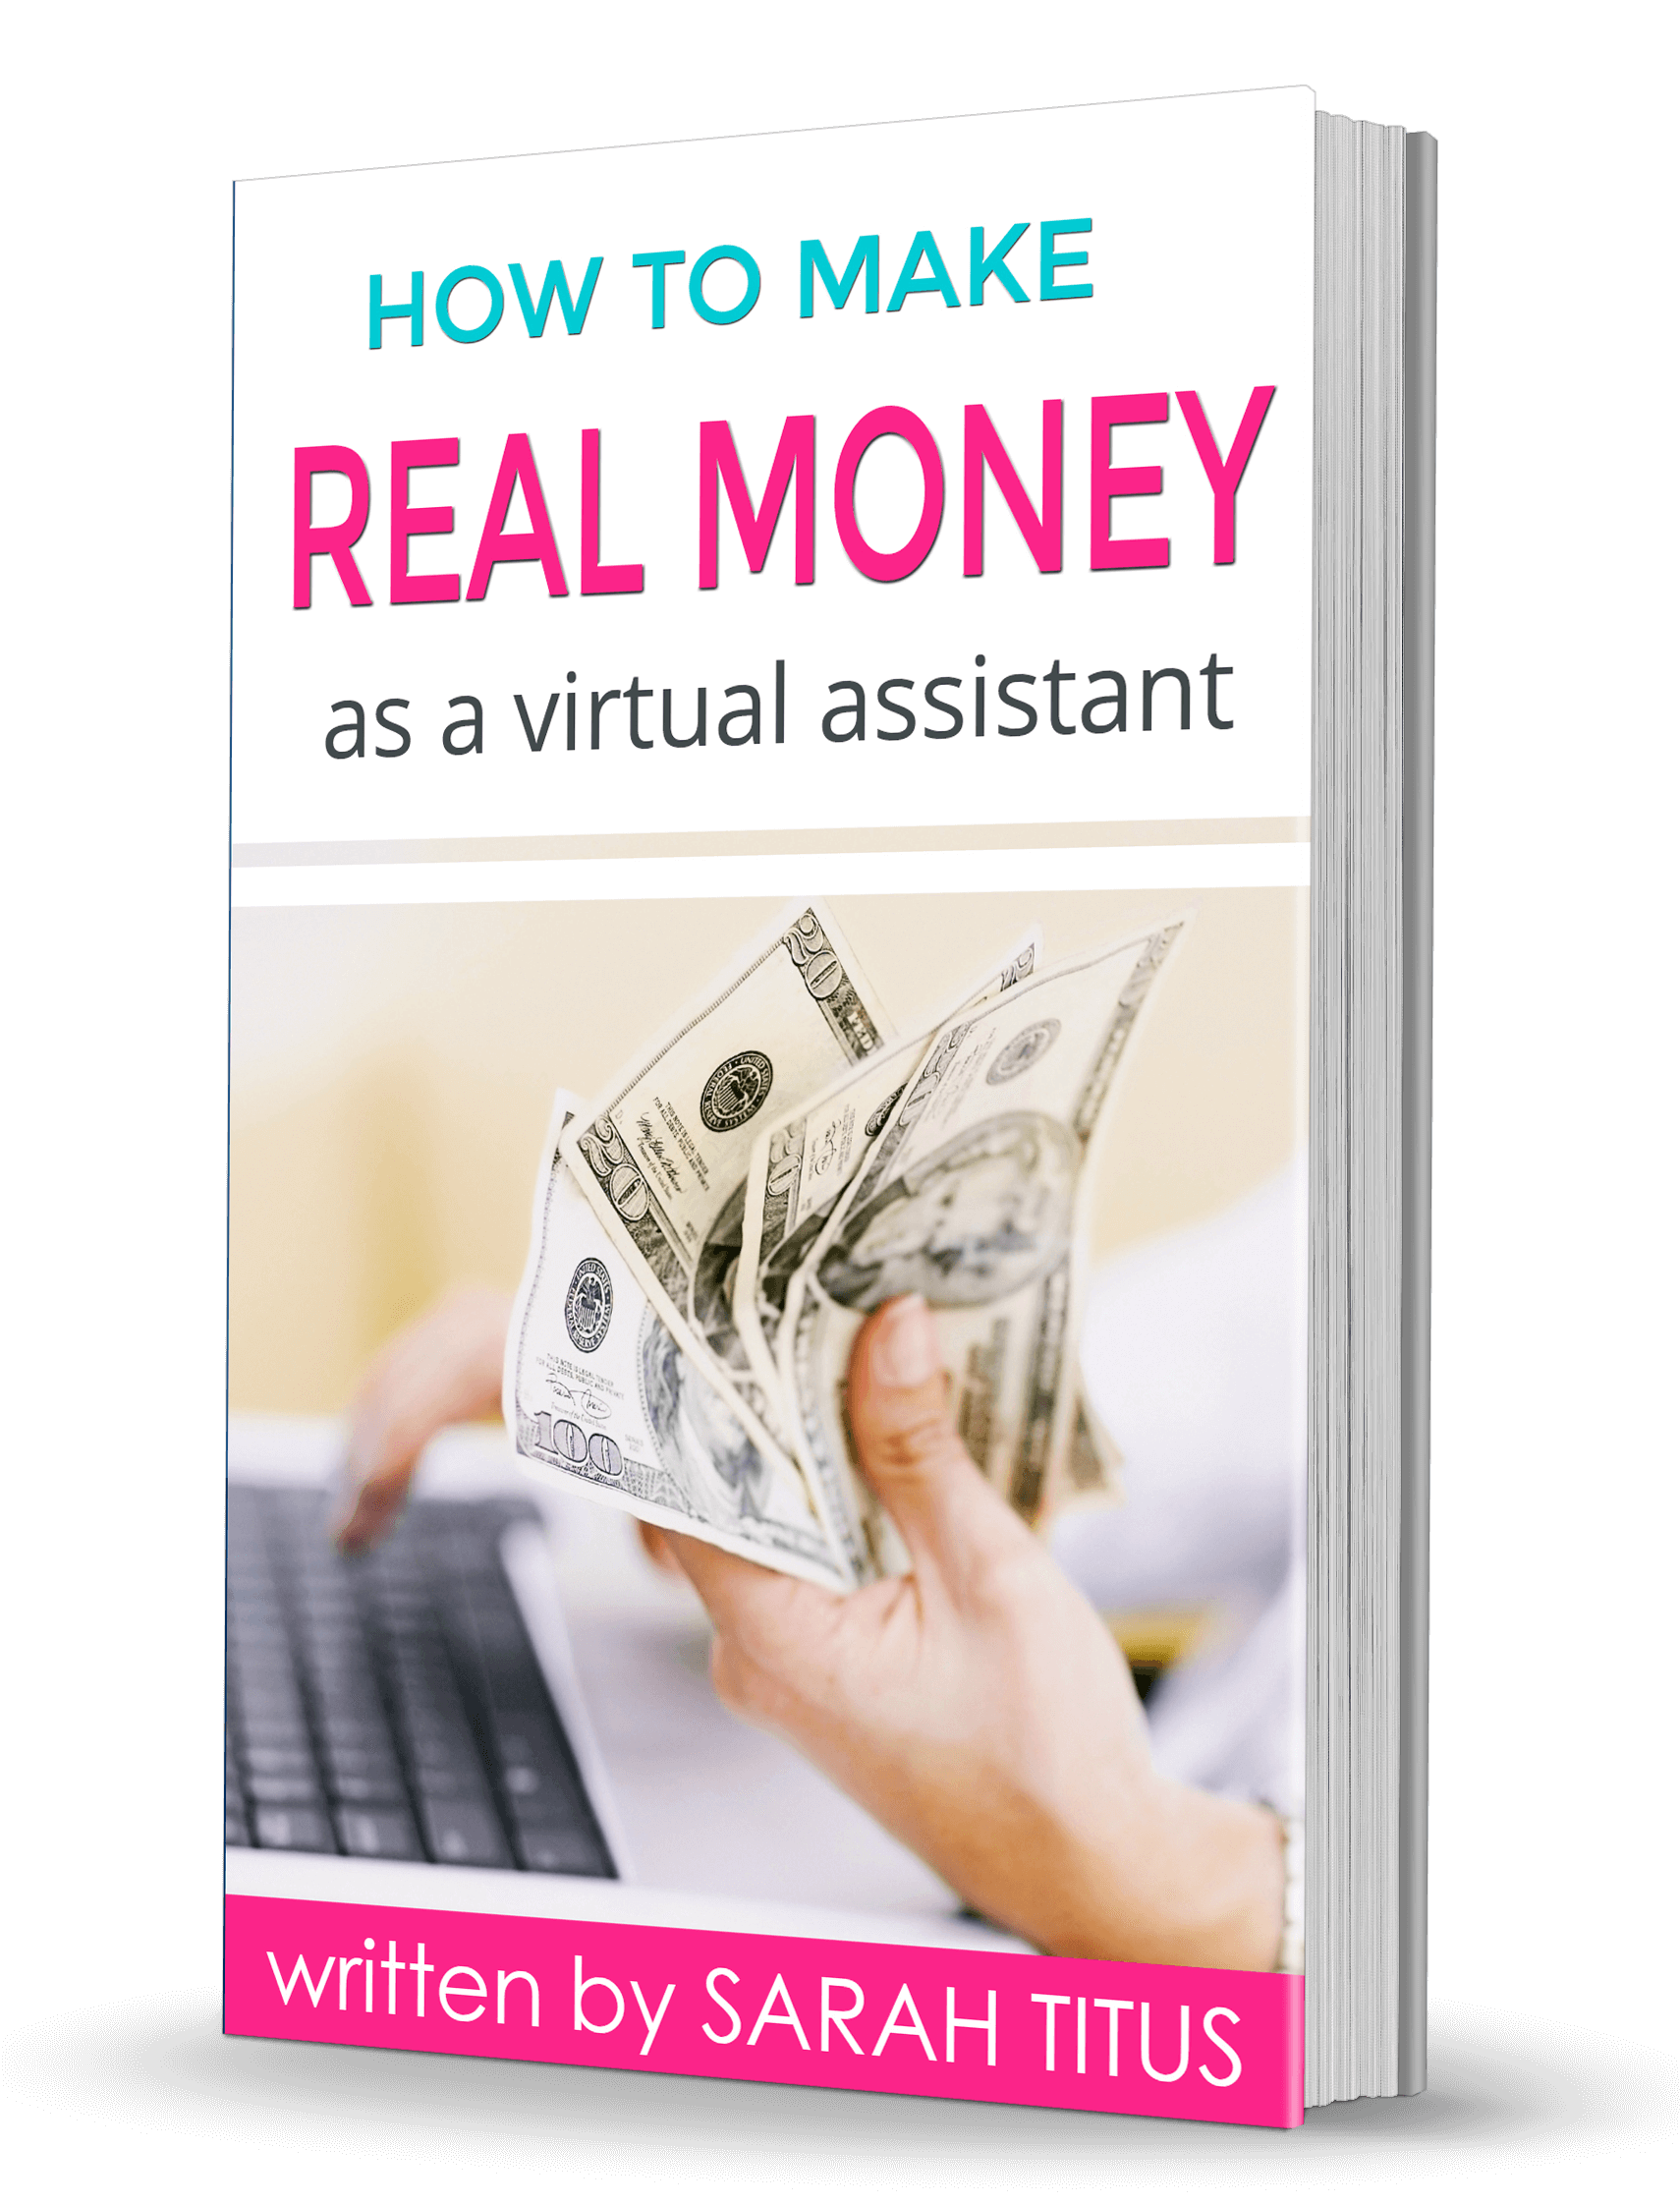 How to Make Real Money as a Virtual Assistant